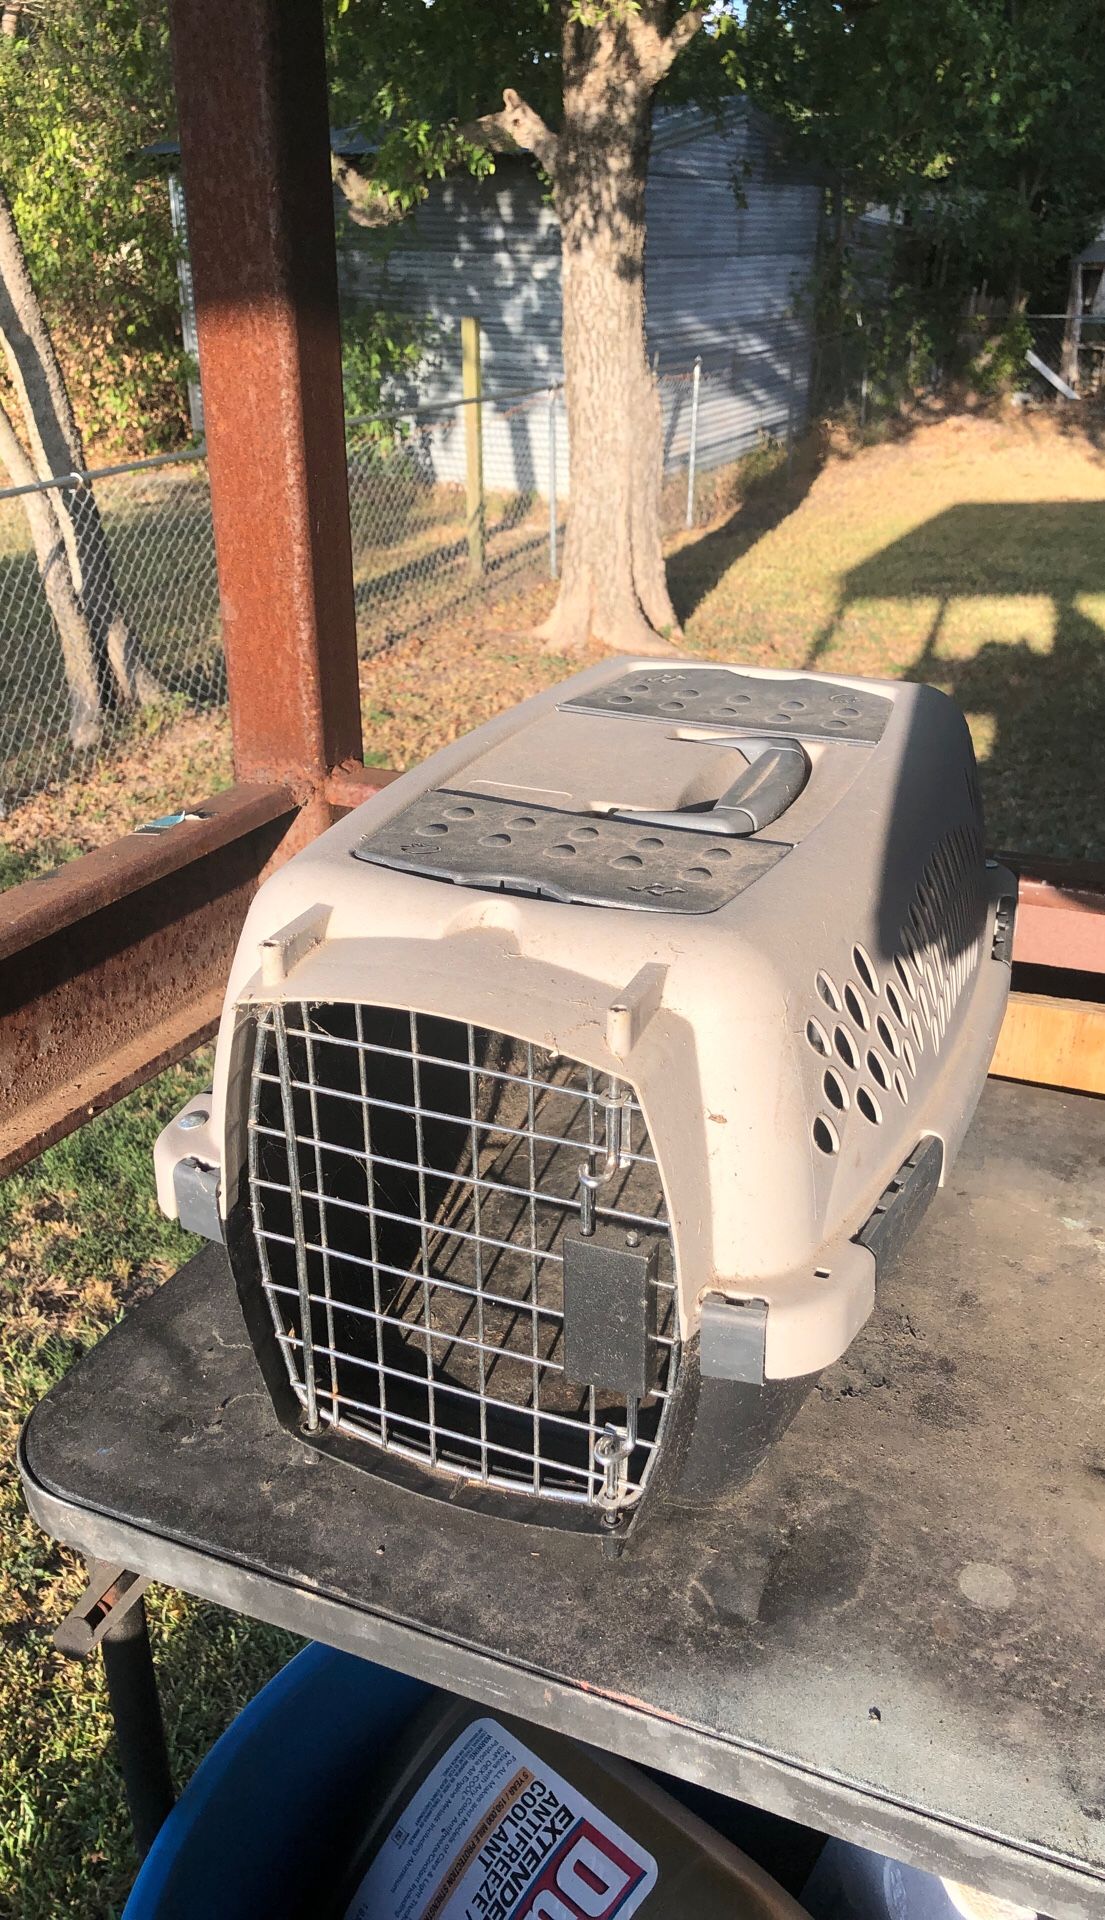 Small Petmate pet taxi/ crate for small dog or cat